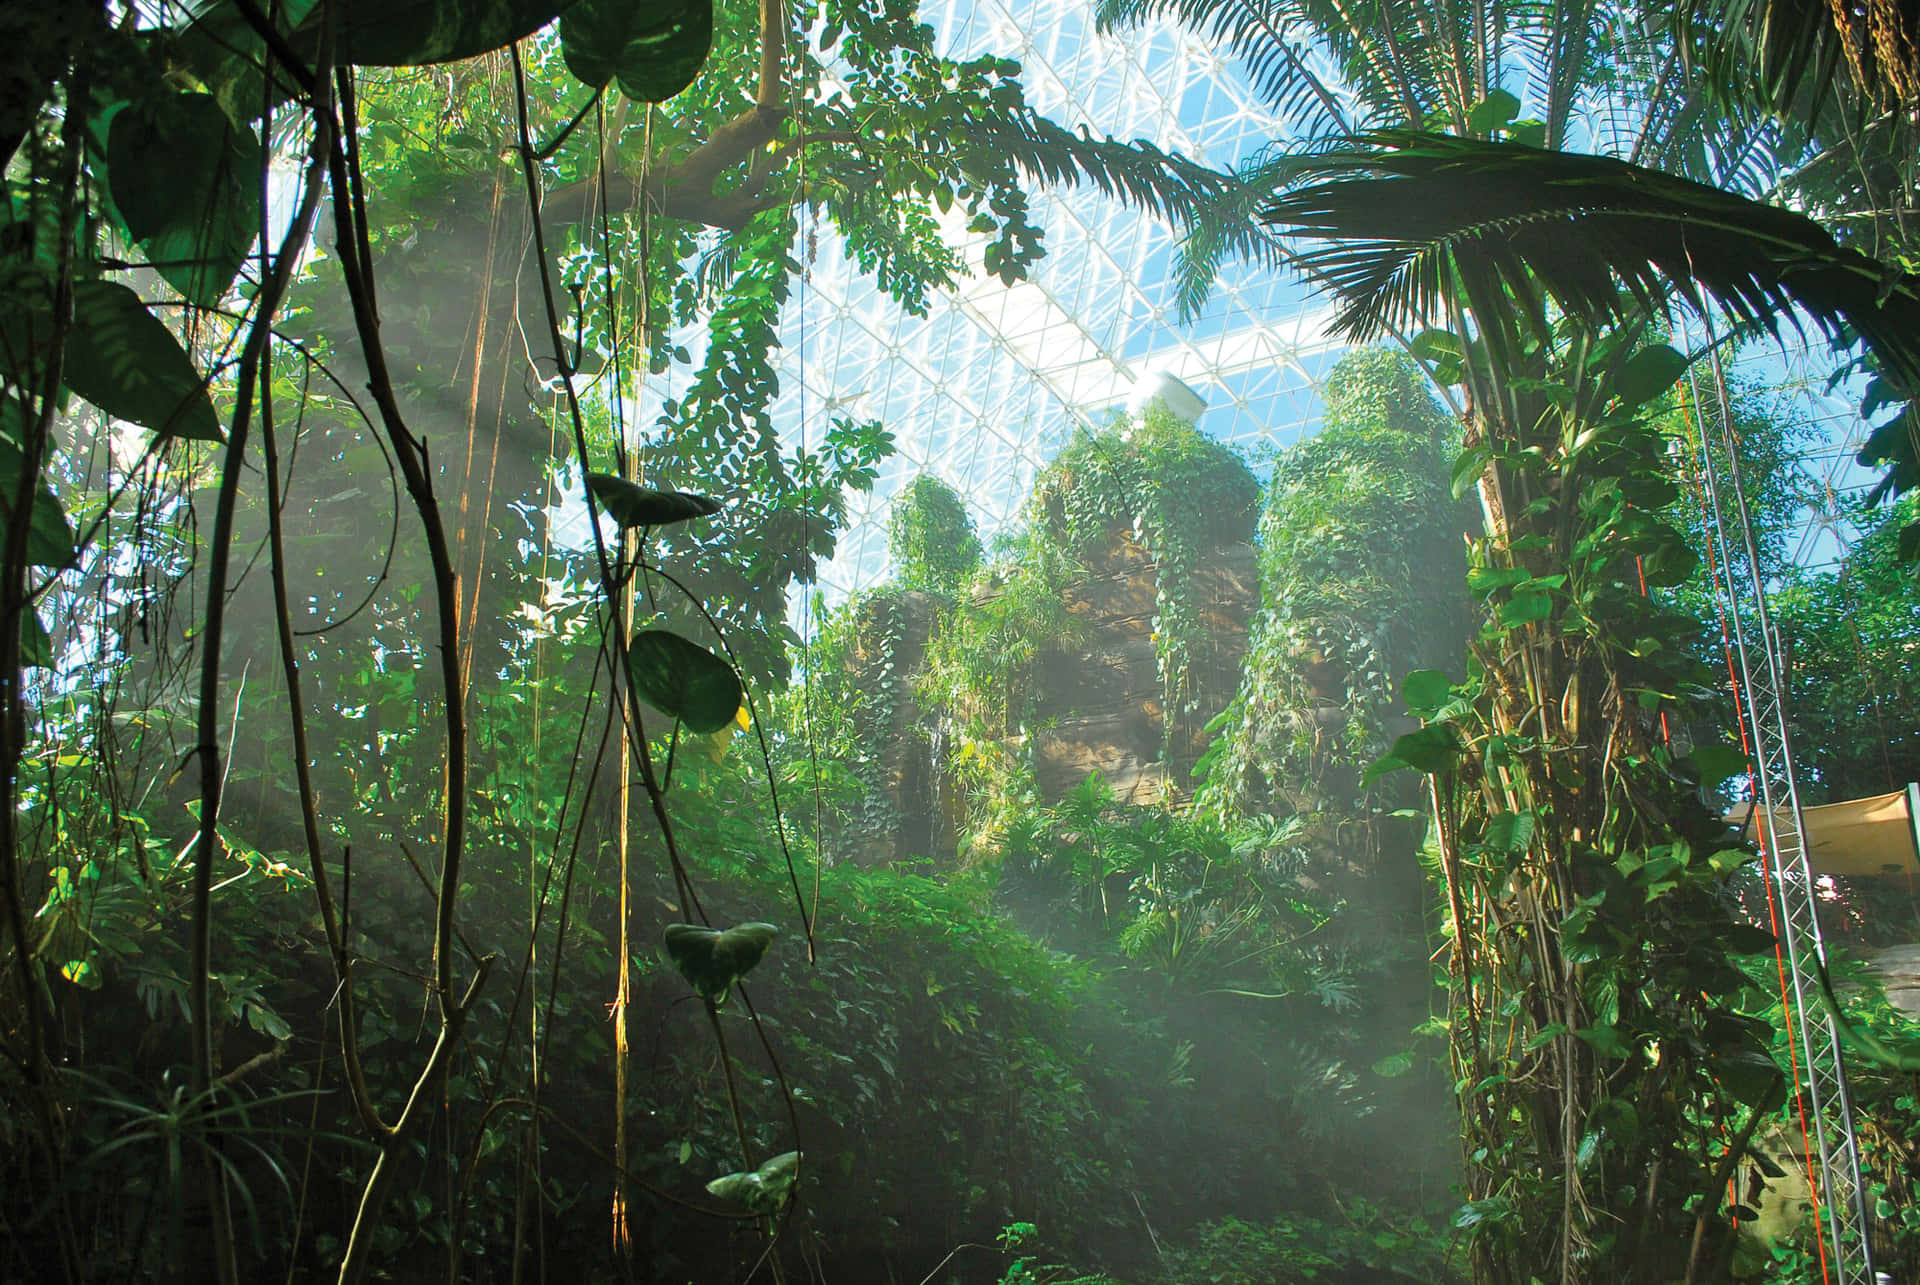 A world of ecosystems inside the biosphere.